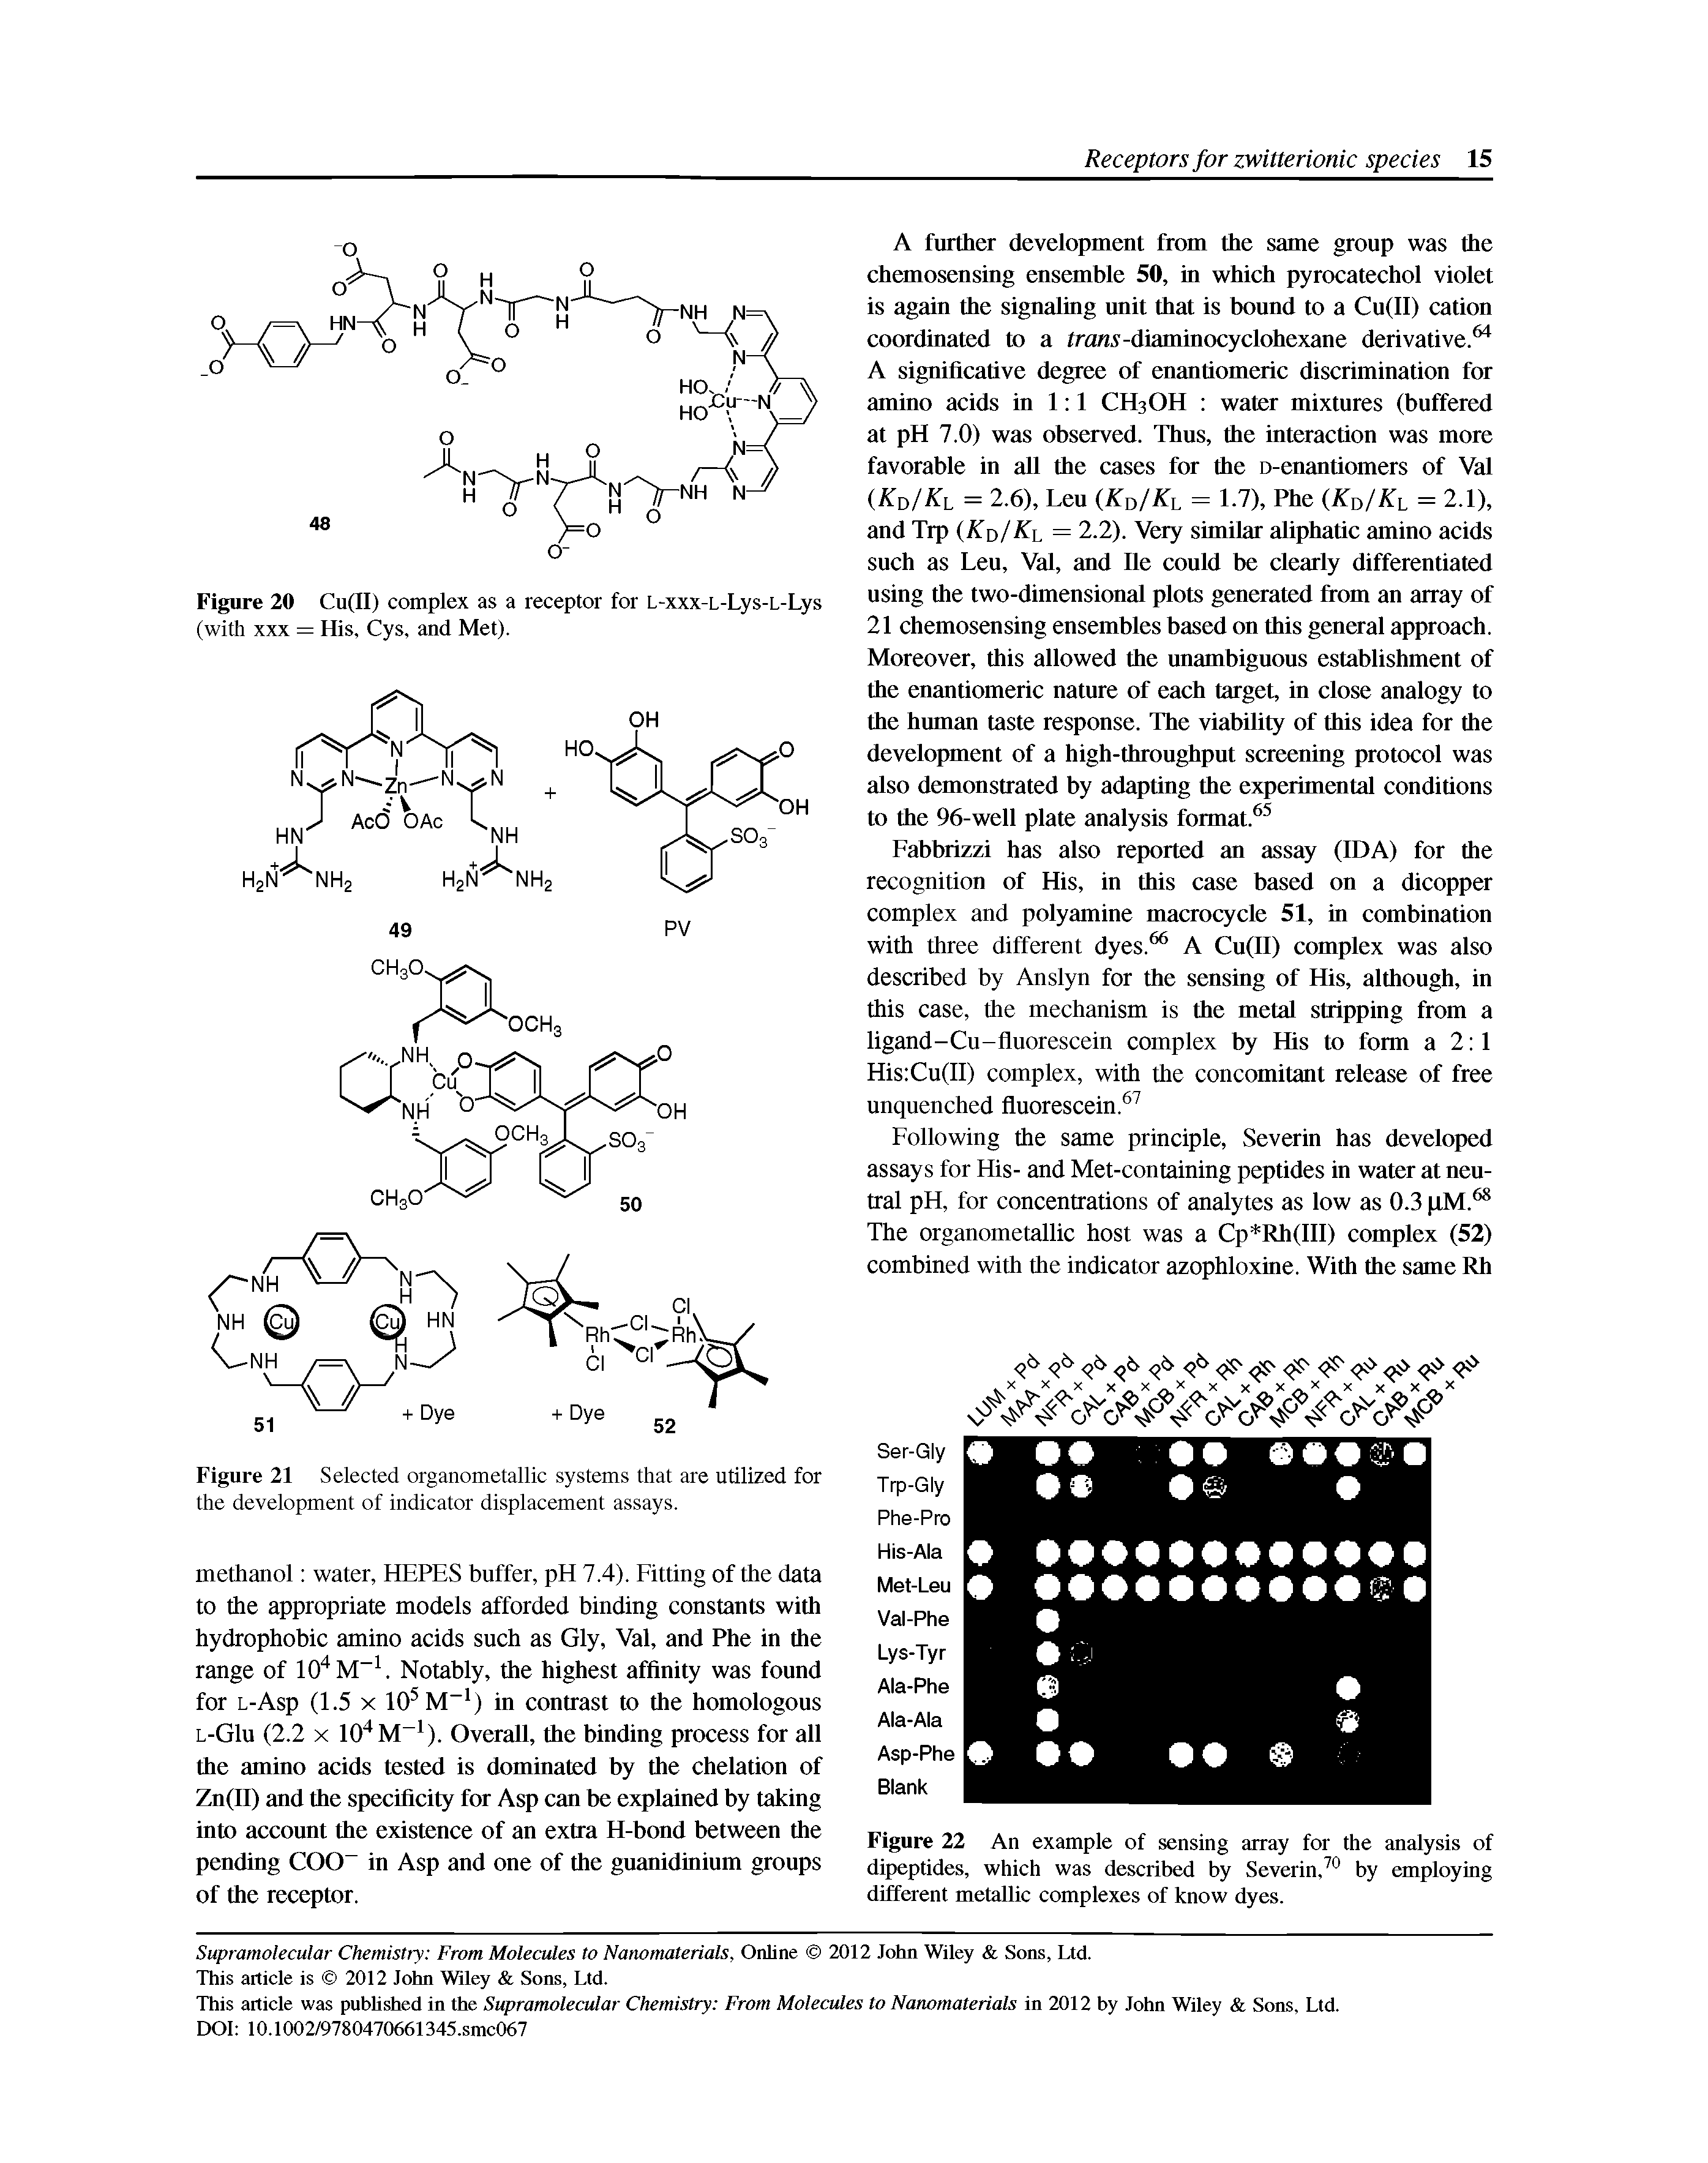 Figure 22 An example of sensing array for the analysis of dipeptides, which was described by Severin, by employing different metallic complexes of know dyes.